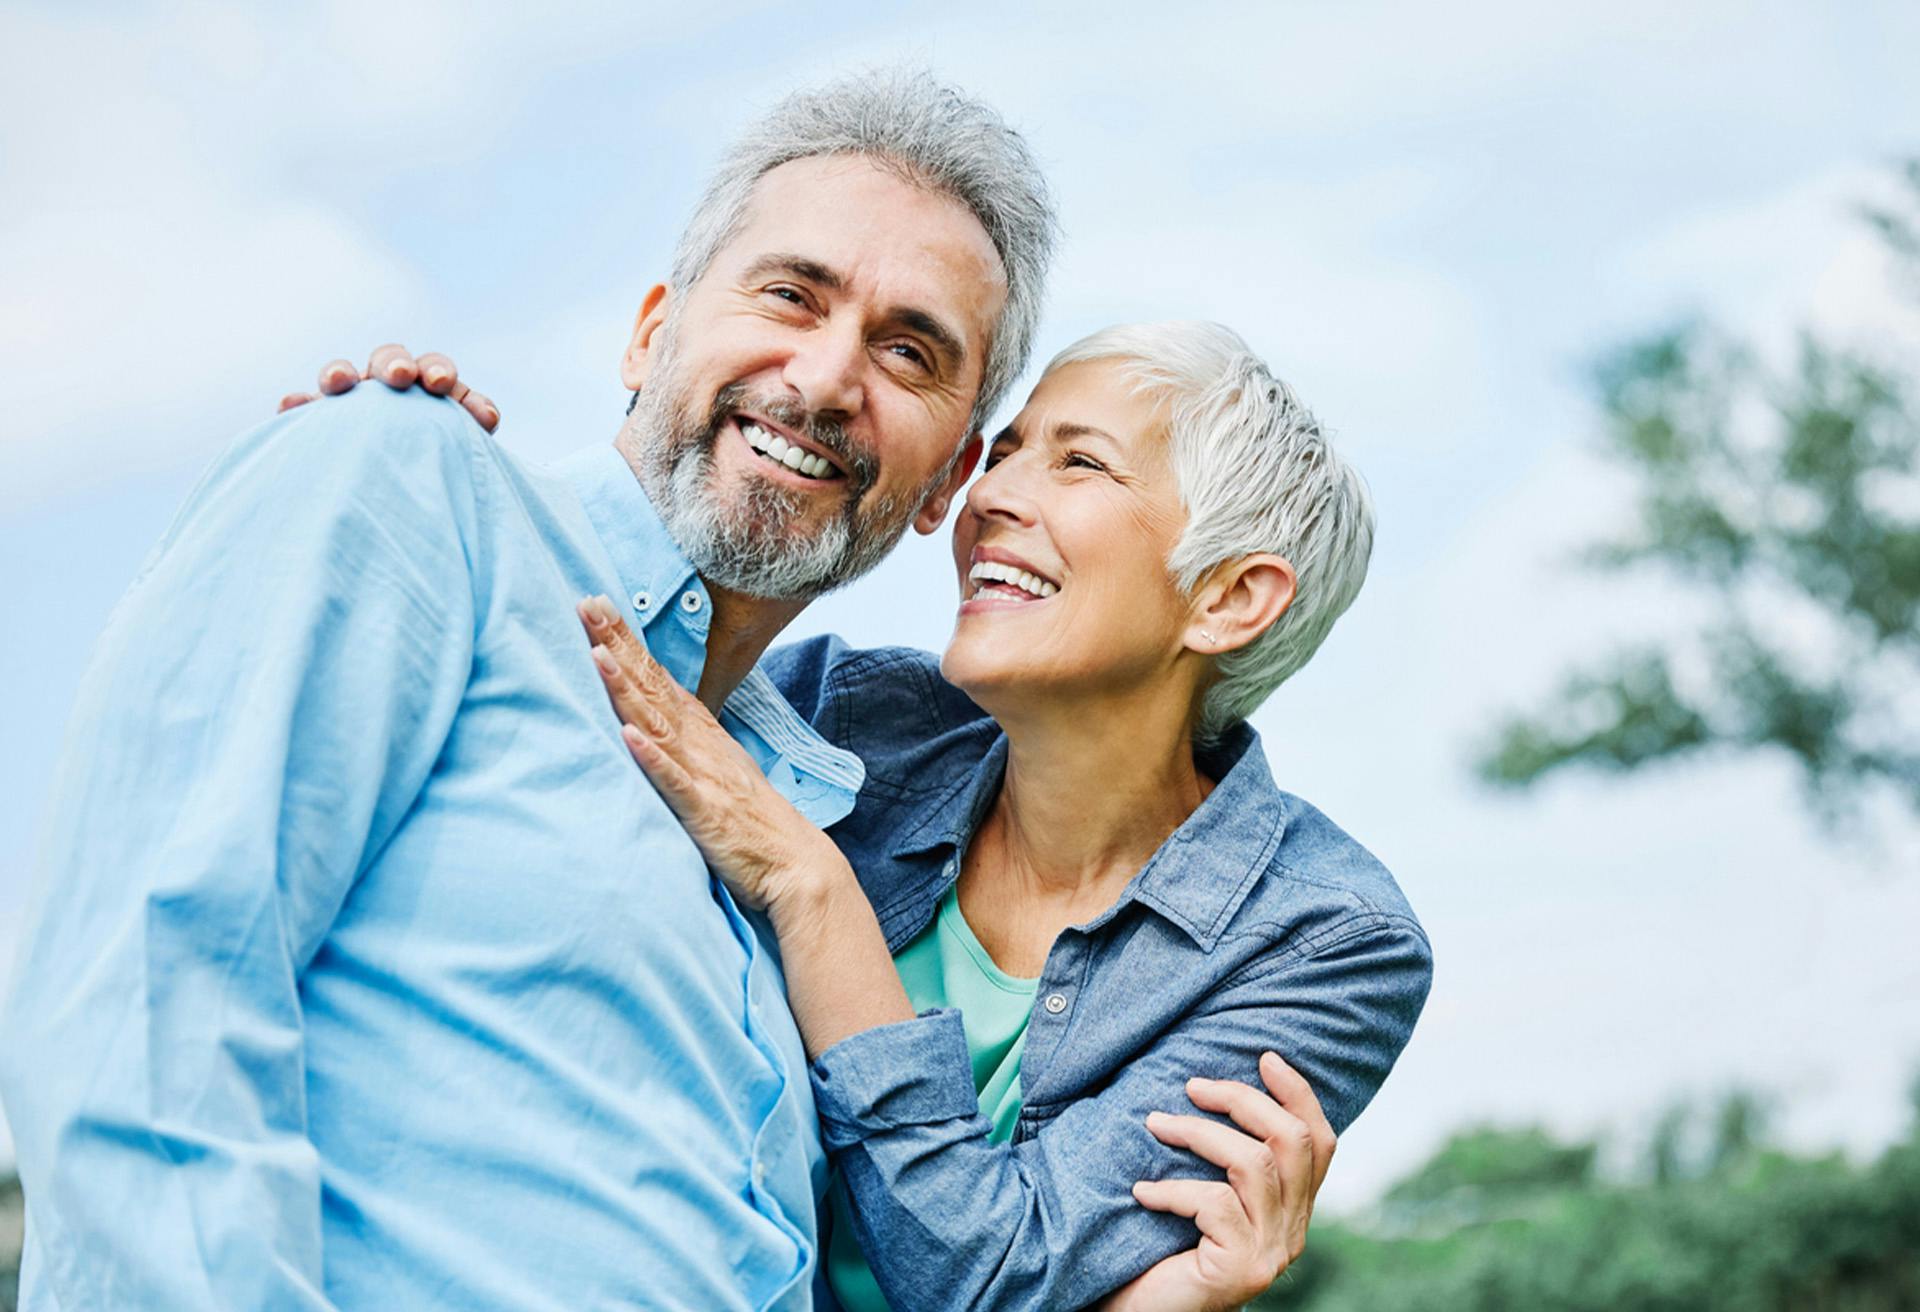 smiling older couple embracing each other in a park